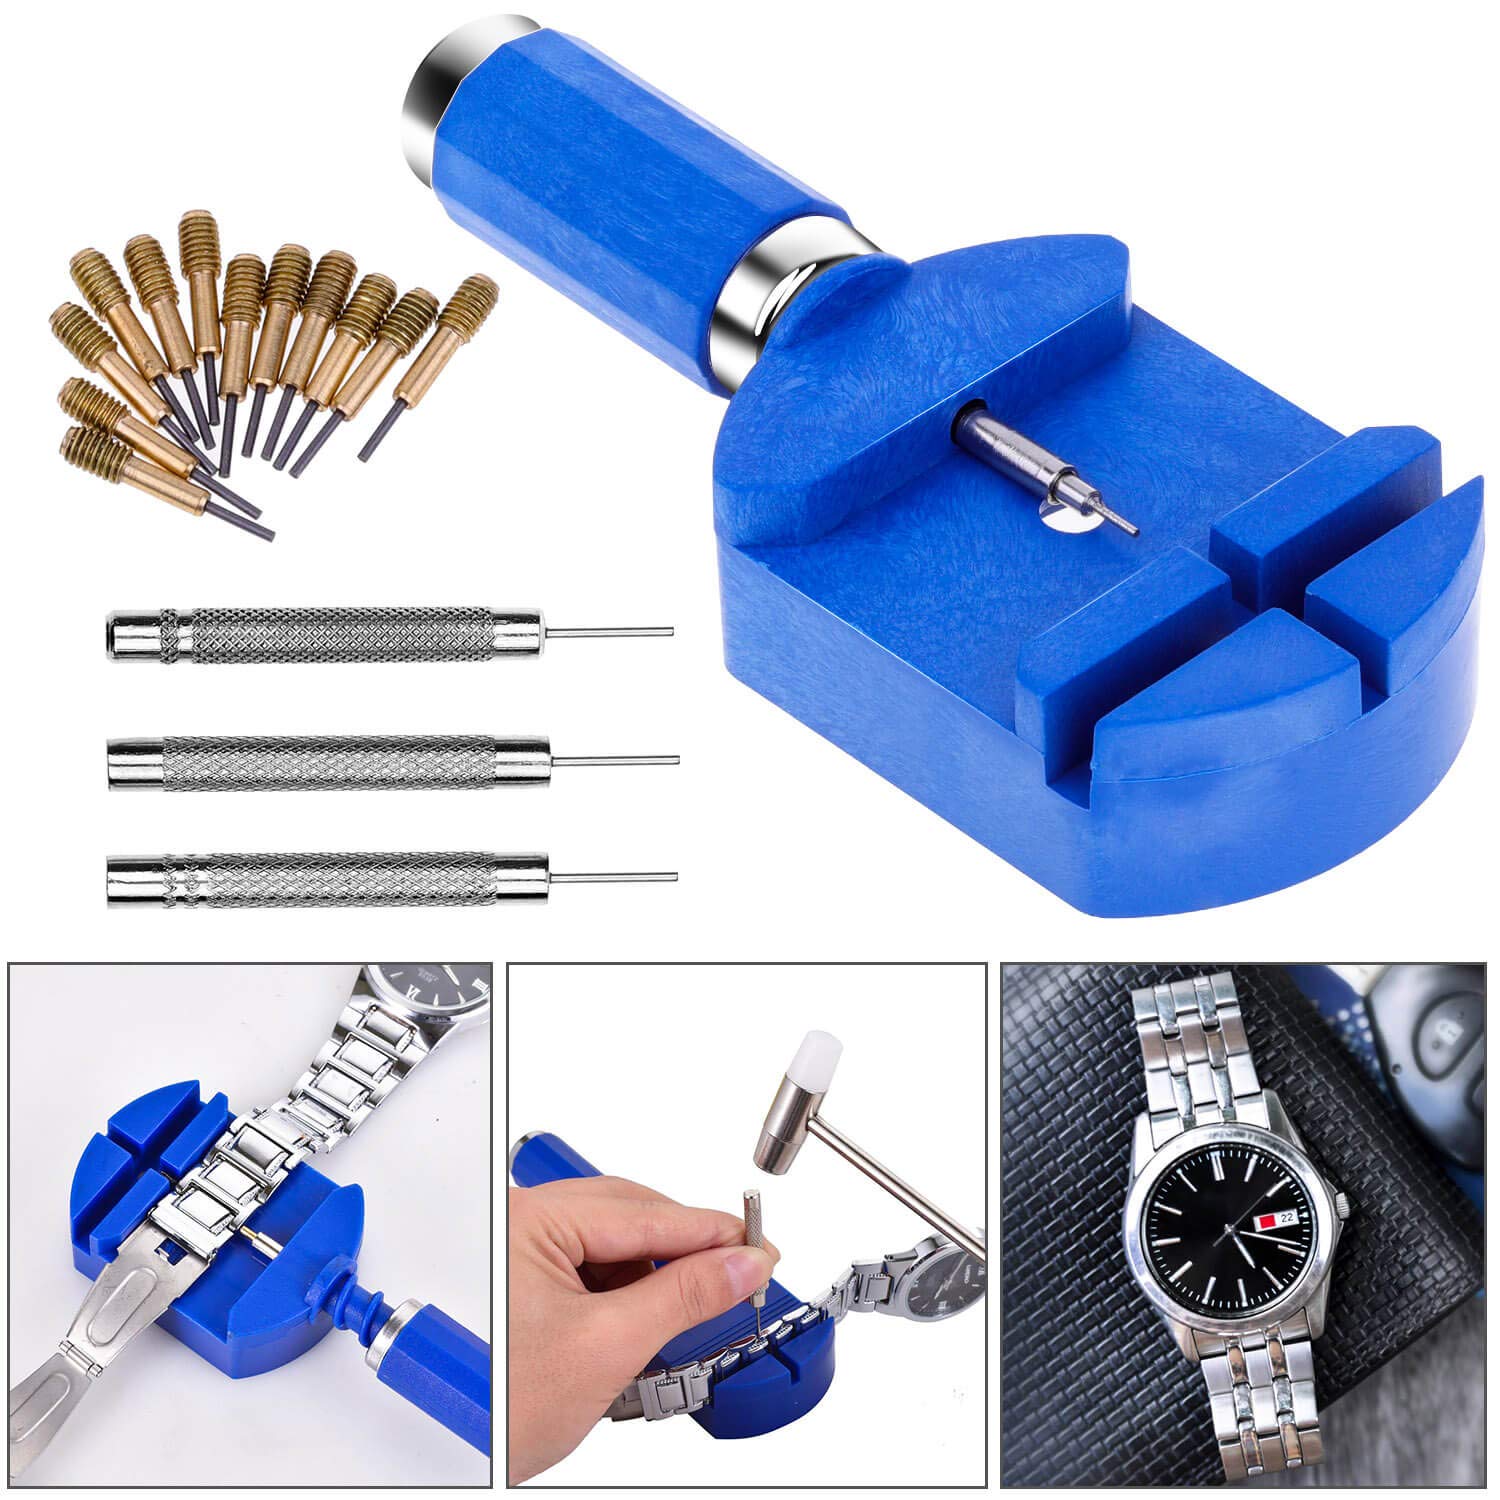 cridoz Watch Link Removal Tool Kit, Watch Band Tool Chain Link Pin Remover with 12pcs Replacement Pins and 3pcs Pin Punches for Watch Bracelet Sizing, Watch Strap Adjustment and Watch Repair